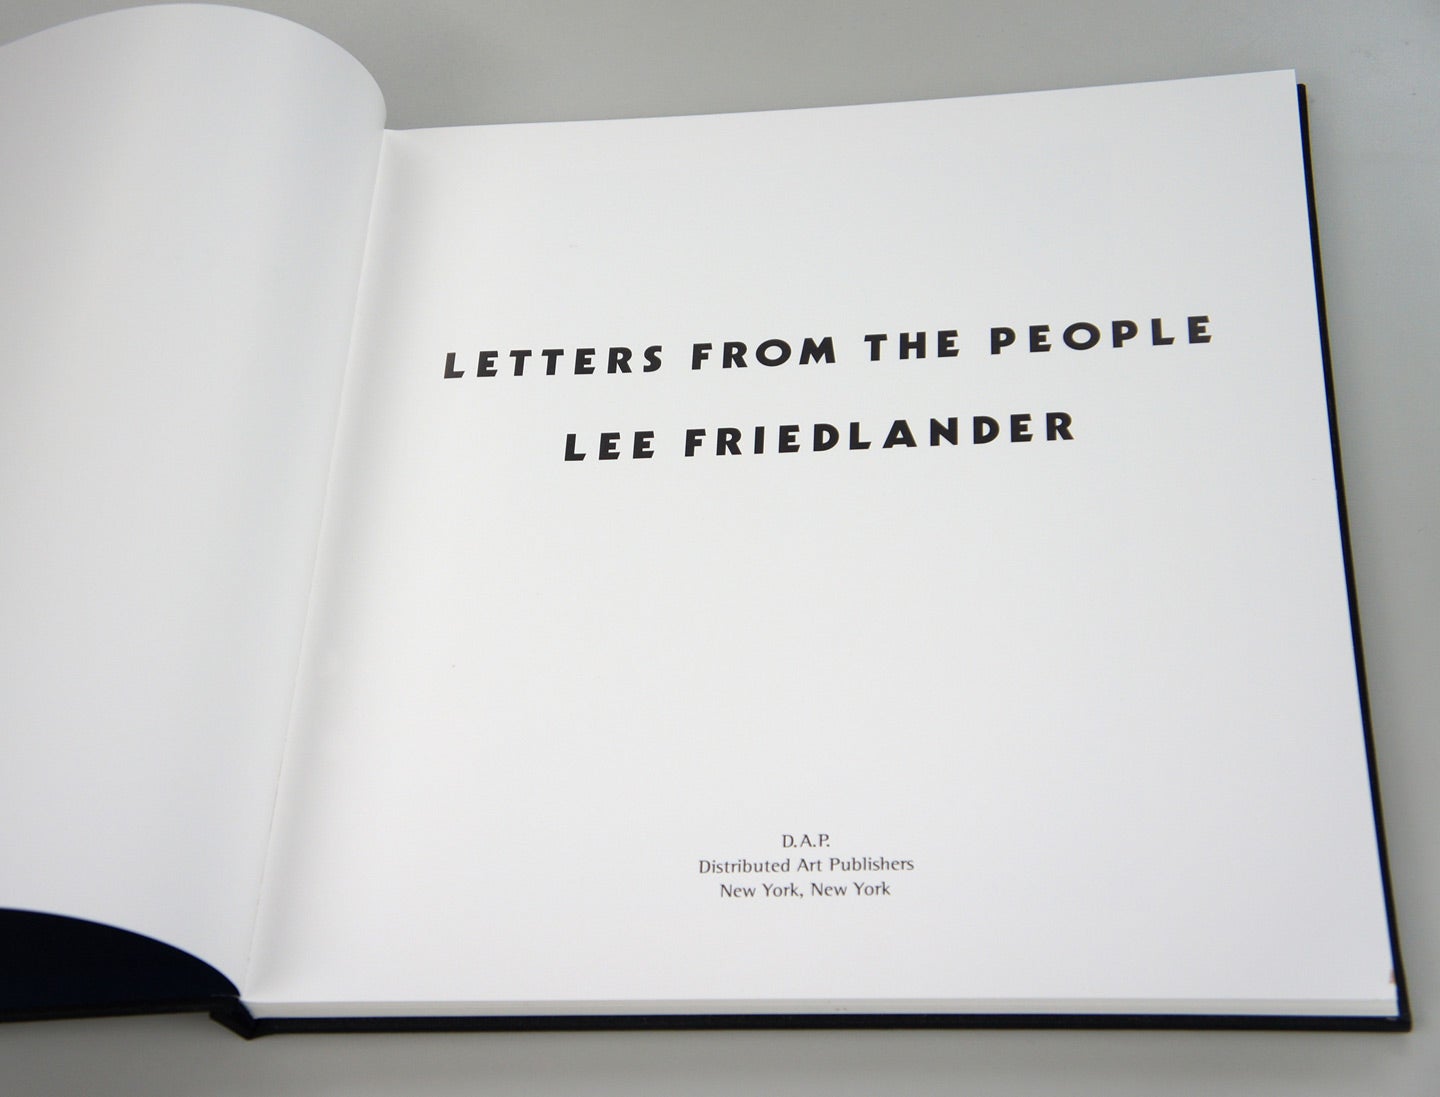 Lee Friedlander: Letters from the People (Special Limited Edition with One Vintage Gelatin Silver Print: "S")